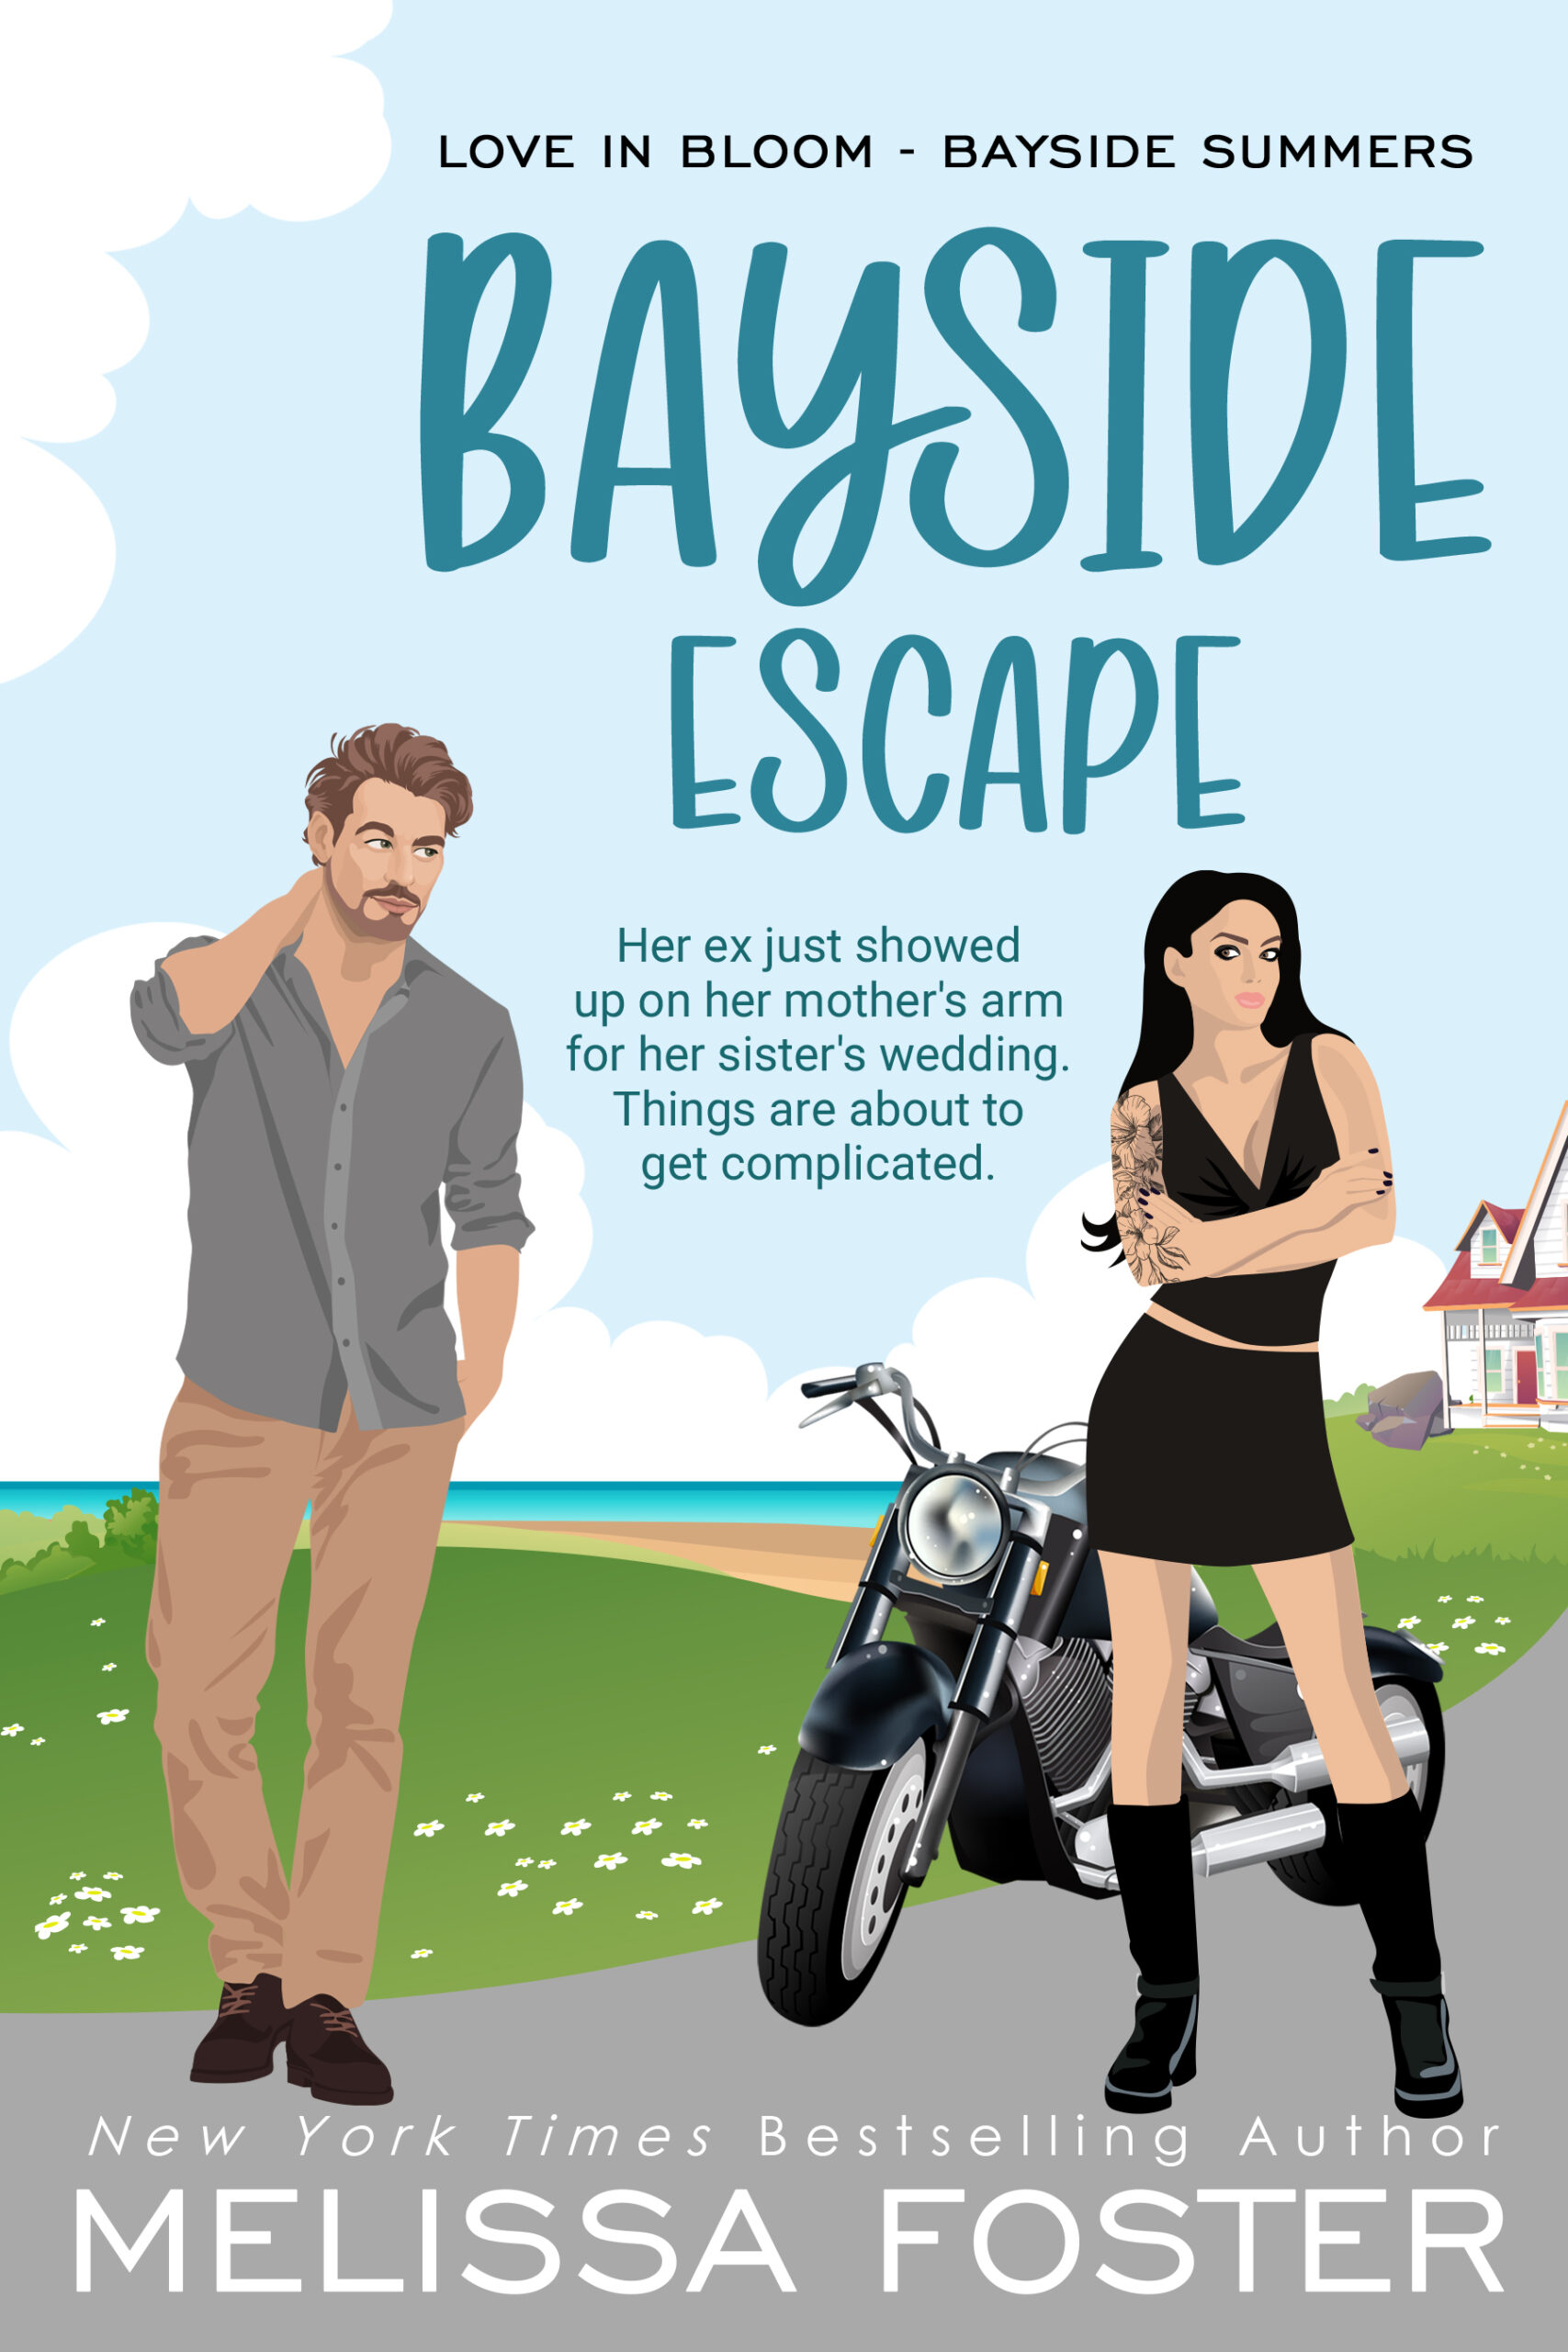 Bayside Escape - Special Edition by Melissa Foster